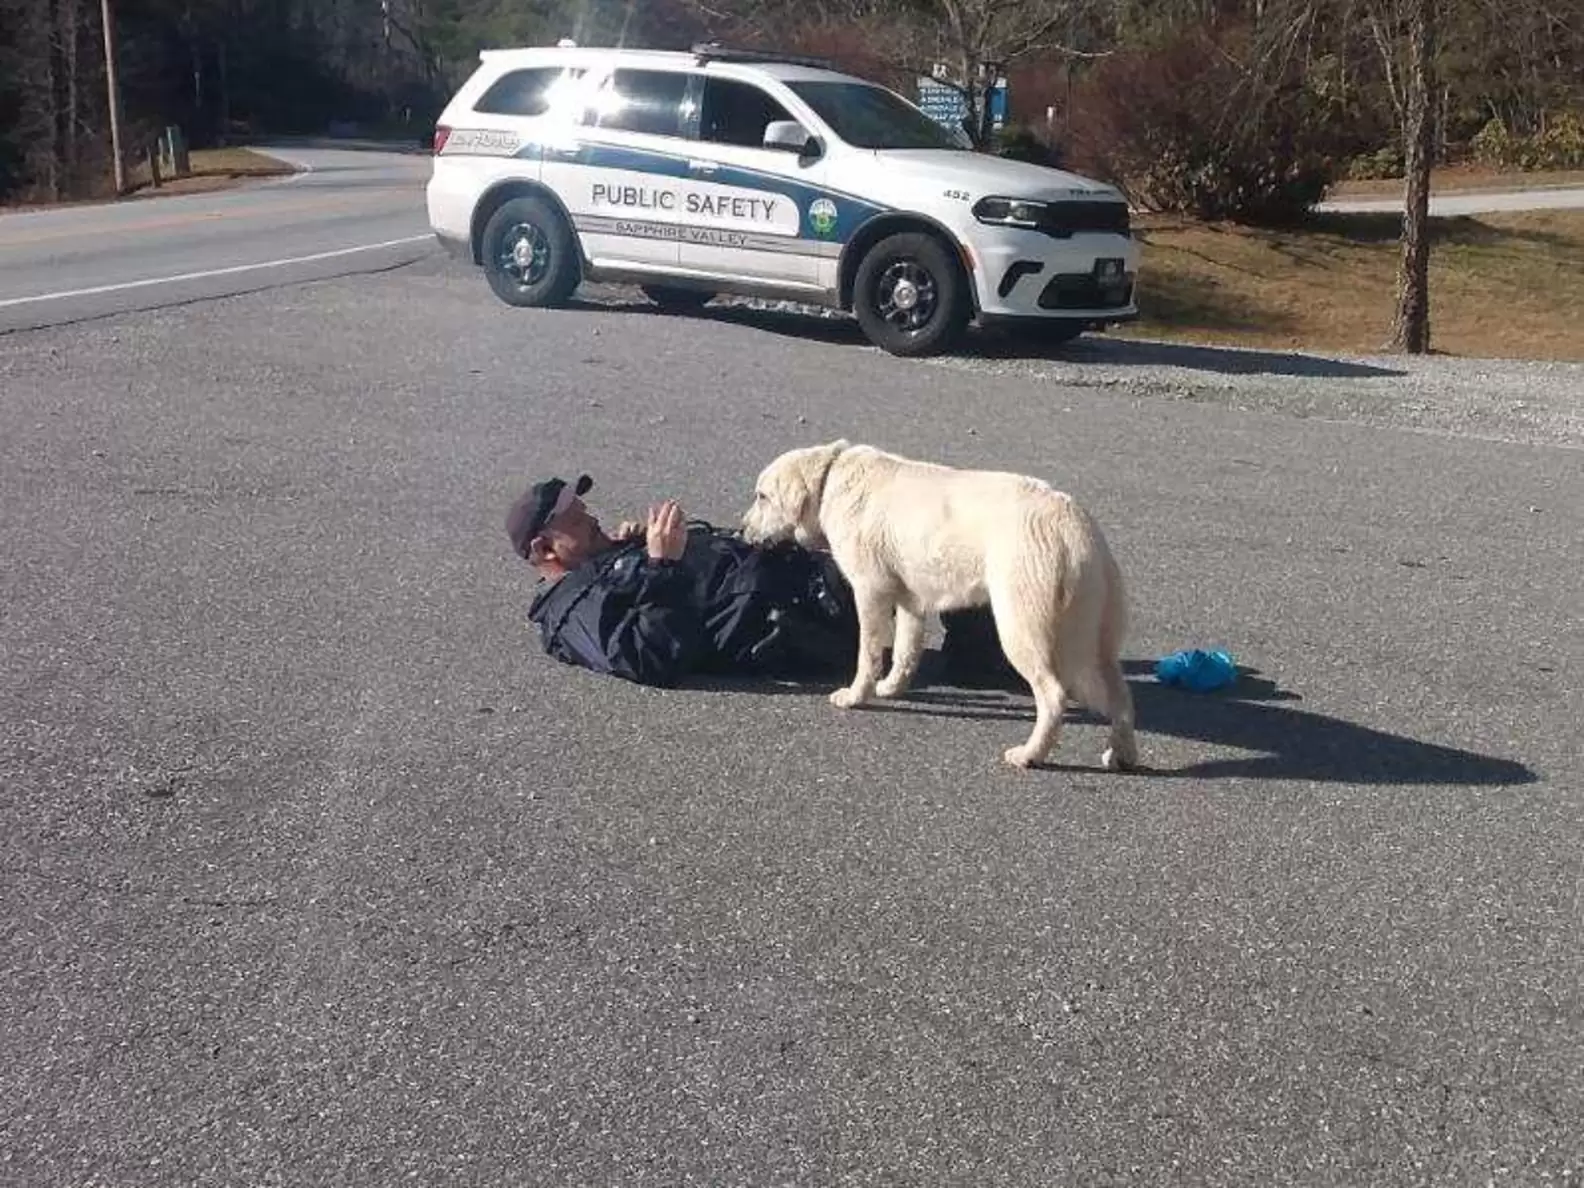 Officer Holcom’s Warmth Melts Sapphire’s Fears: A Stray Dog’s New Beginning